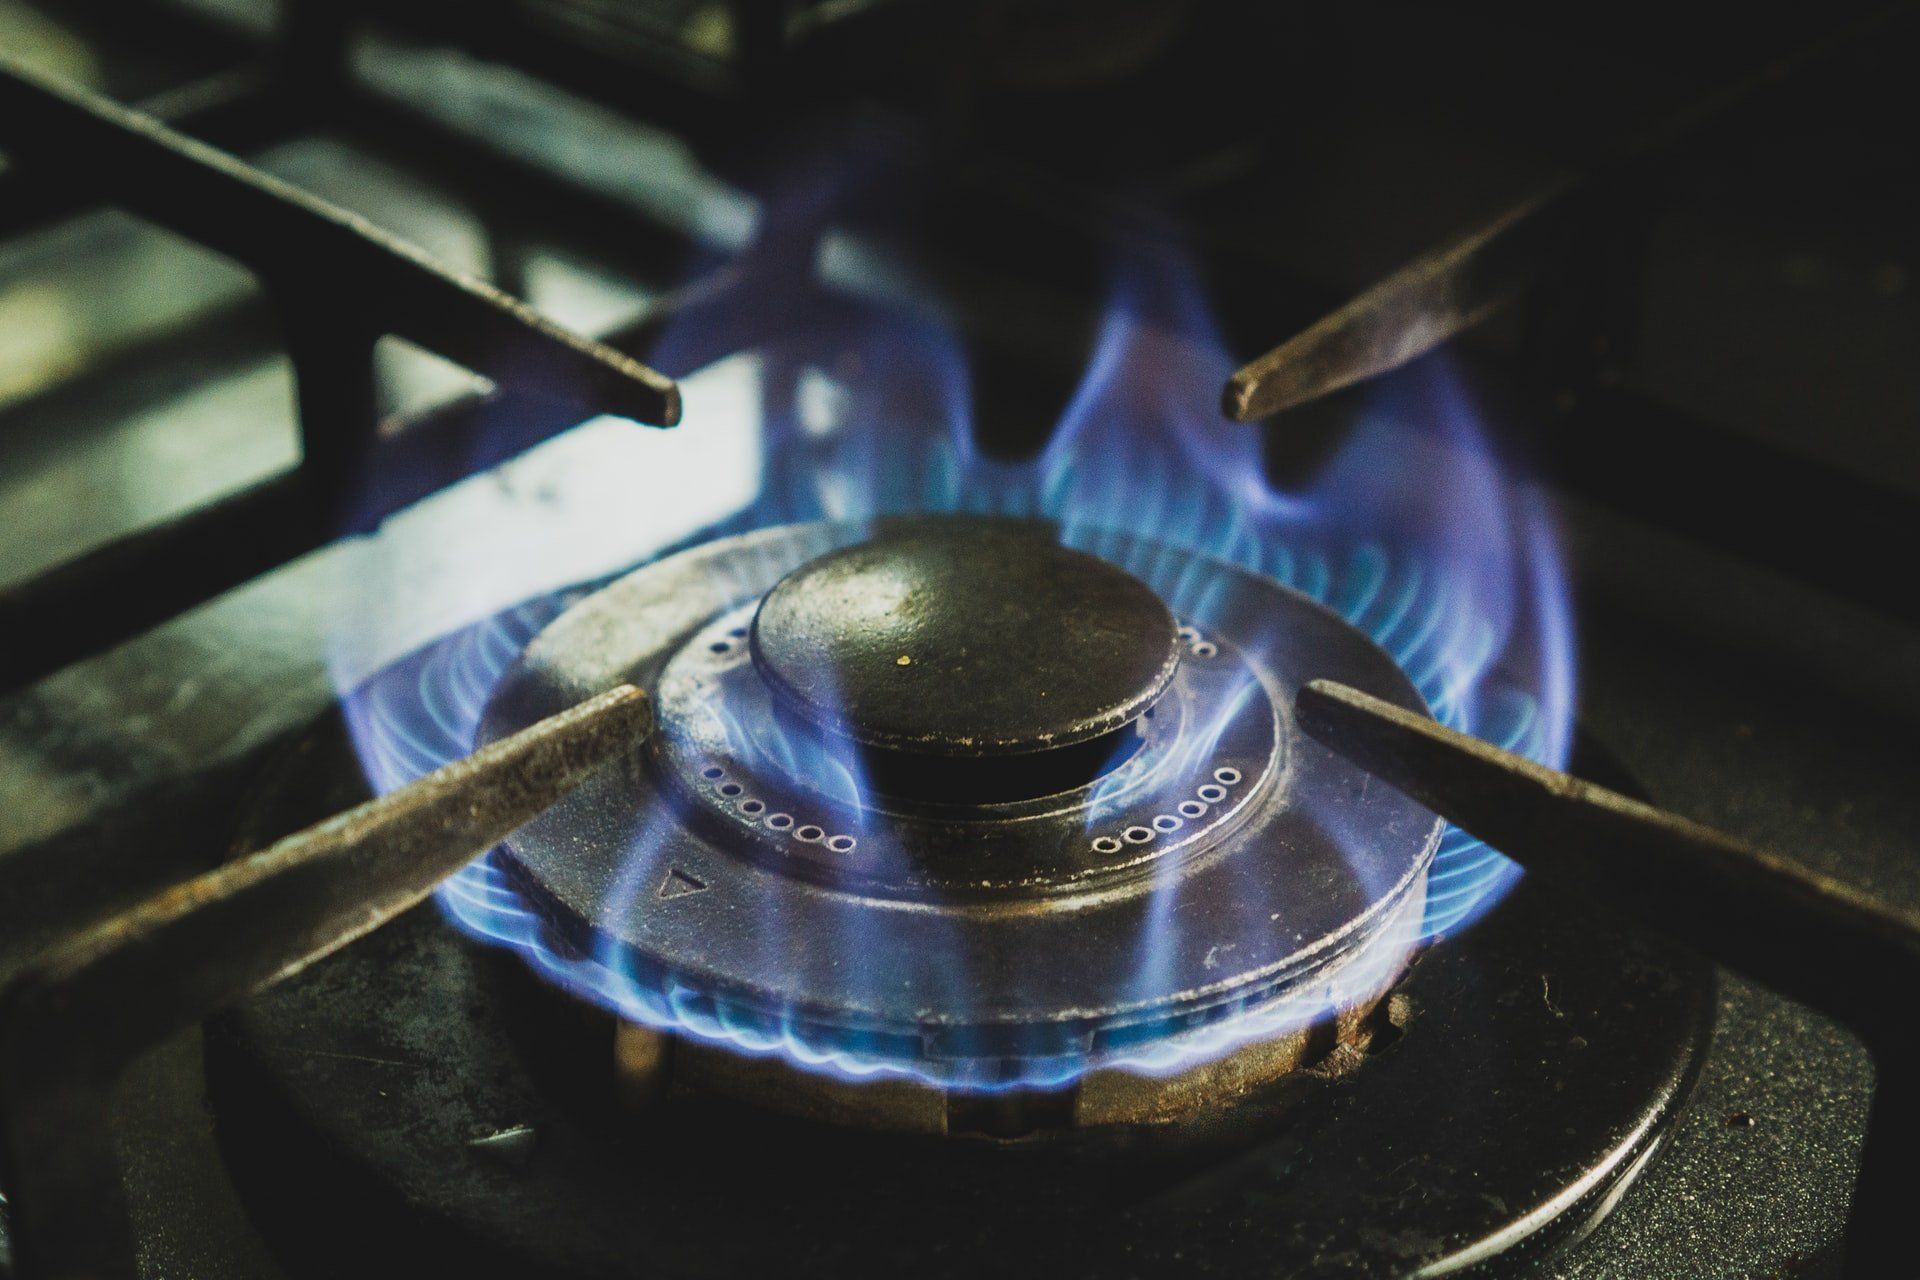 A burner on a natural gas stove producing a blue flame